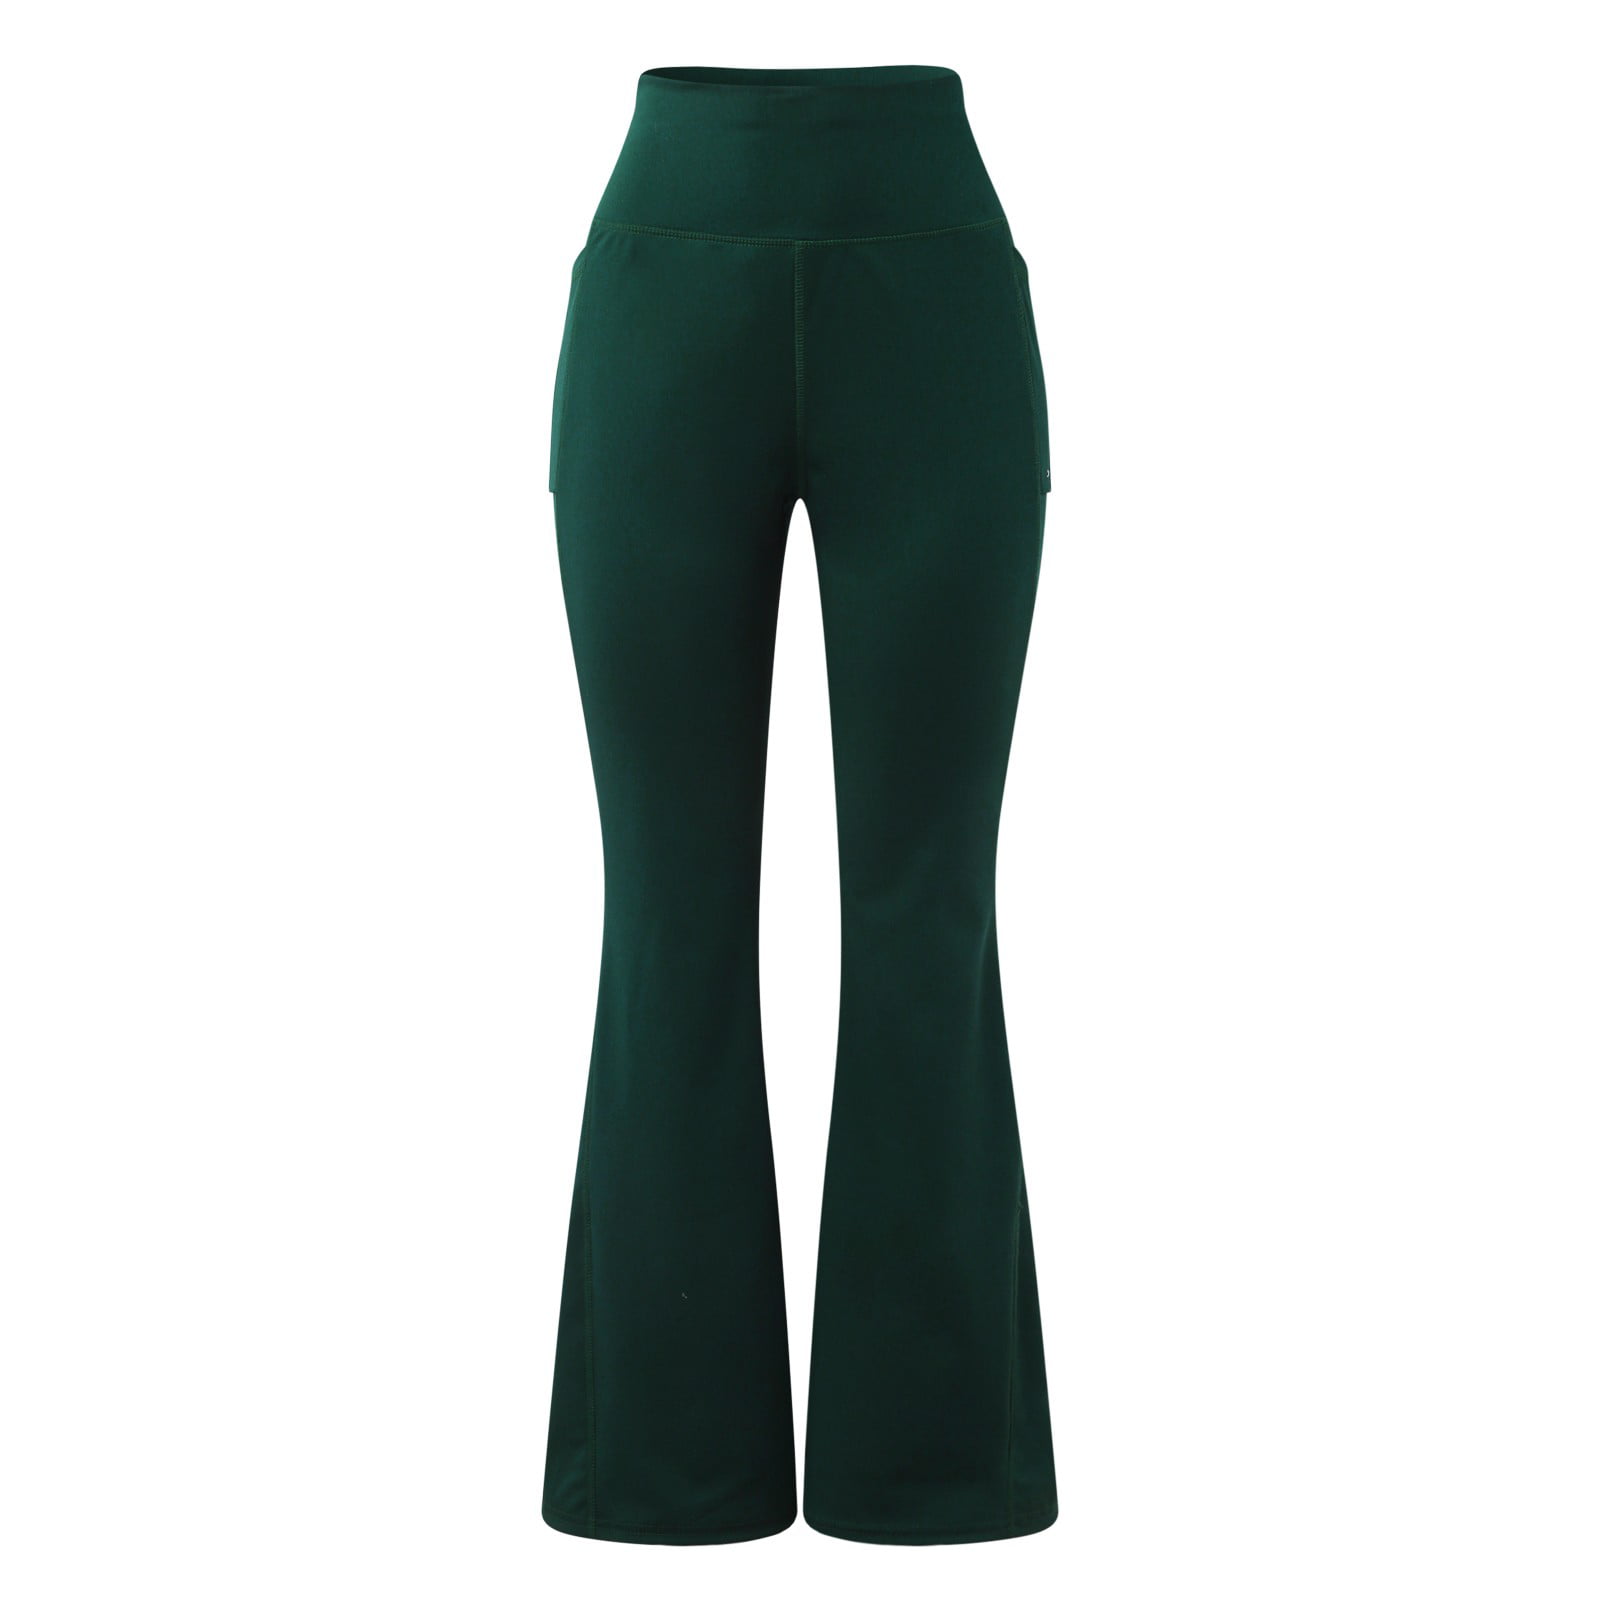 uitzondering cel NieuwZeeland ketyyh-chn99 Green Cargo Pants For Women Dress Pants for Women Business  Casual Stretch Pull On Work Office Dressy Leggings Skinny Trousers with  Pockets - Walmart.com